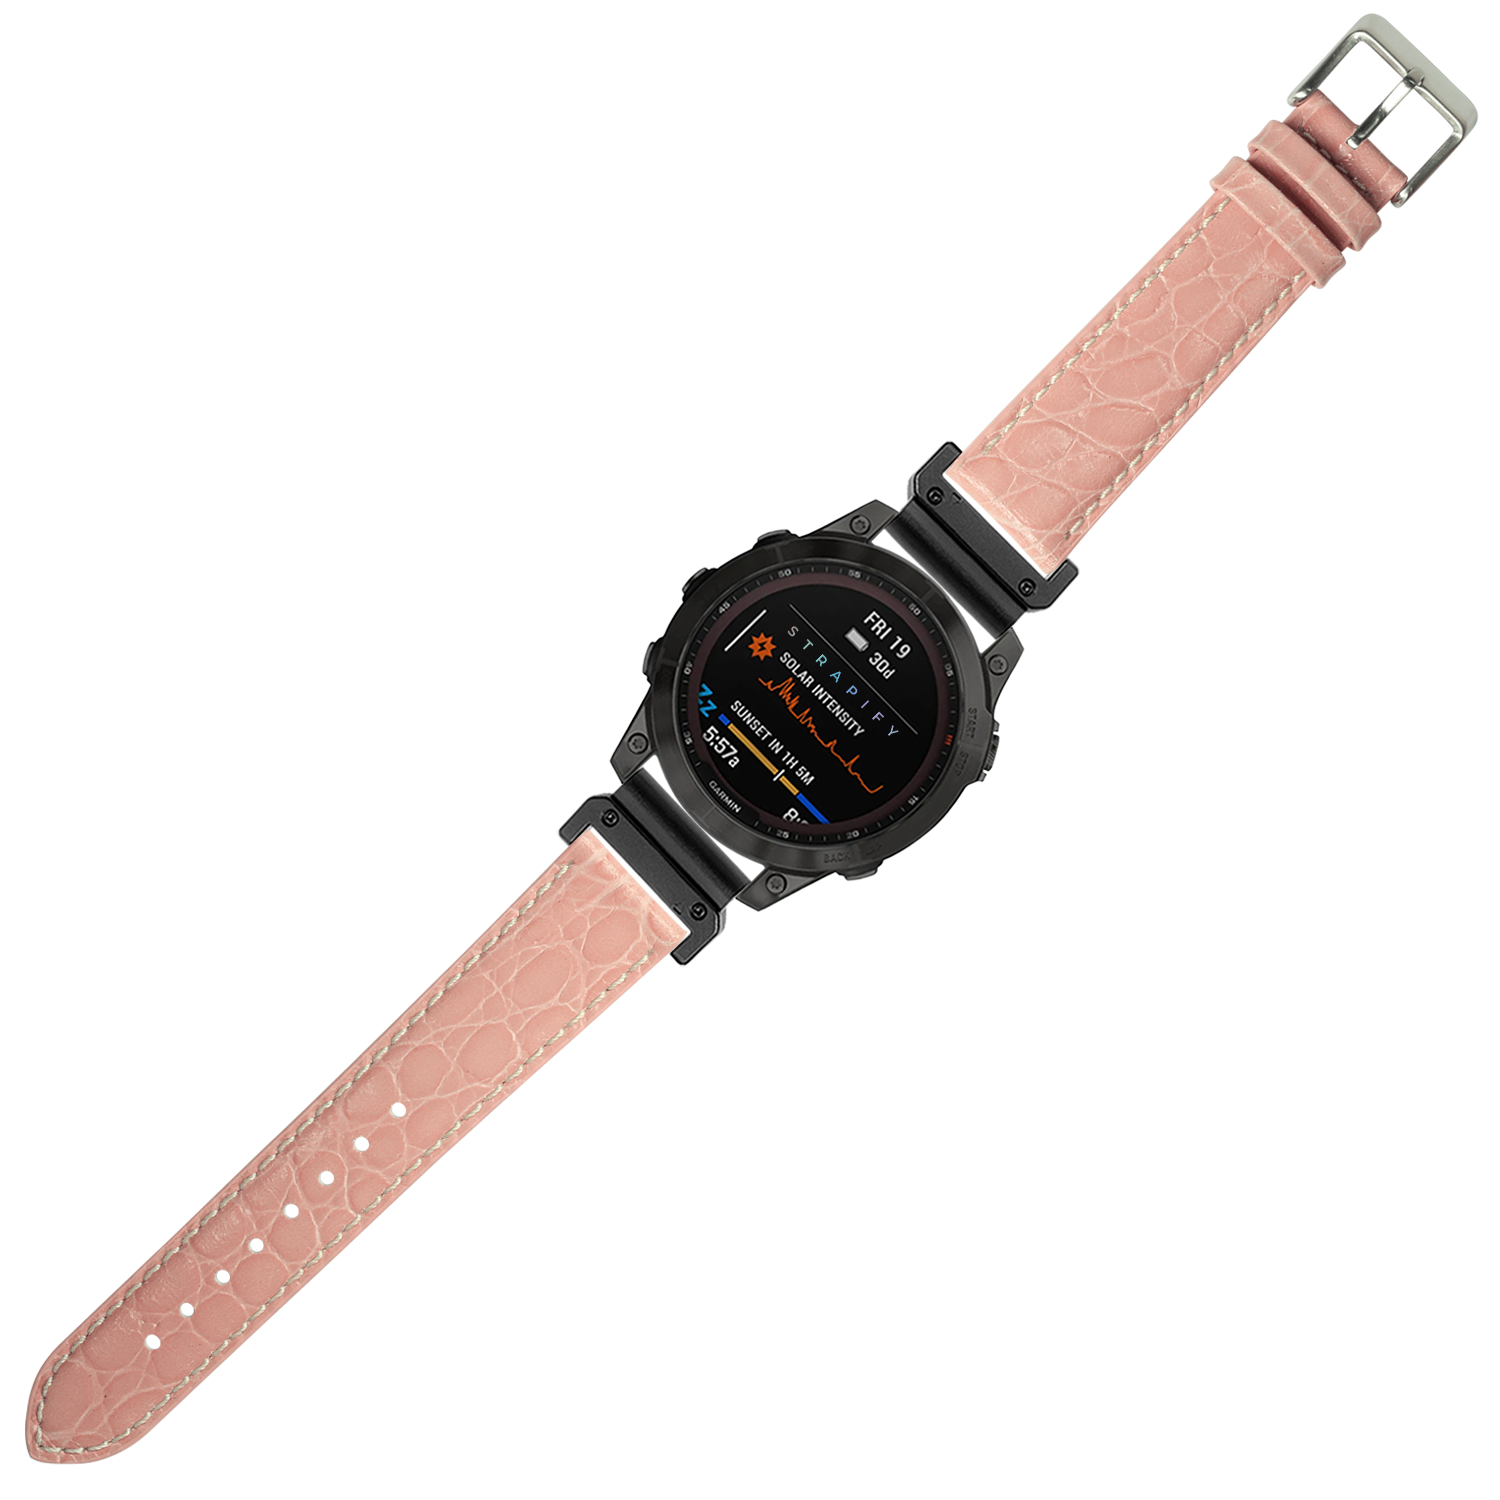 [QuickFit] Alligator Leather - Pink with White Stitching 26mm